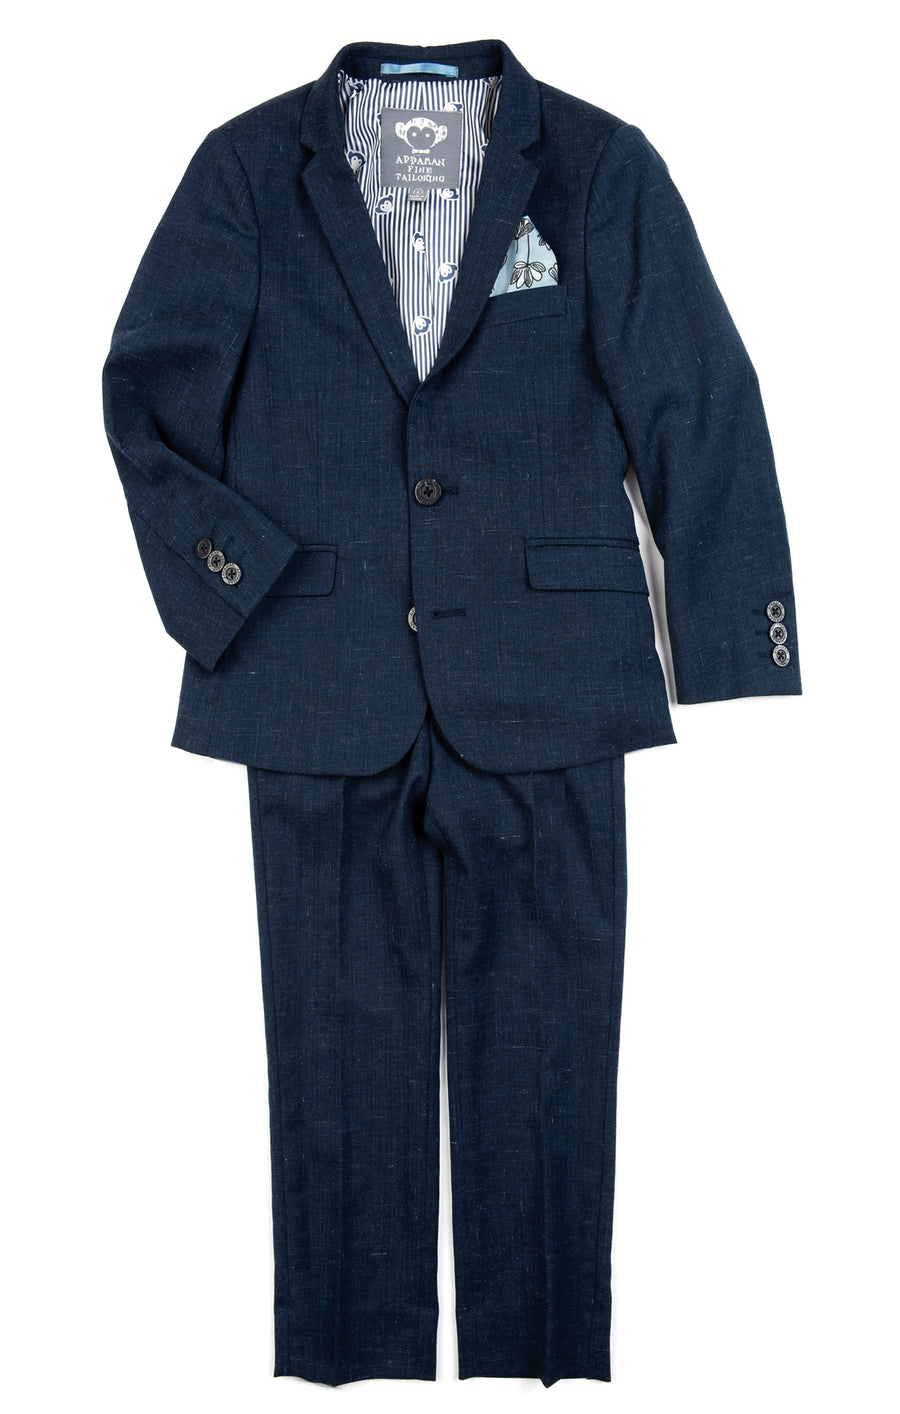 Blue Nights 2-Piece Mod Suit by Appaman